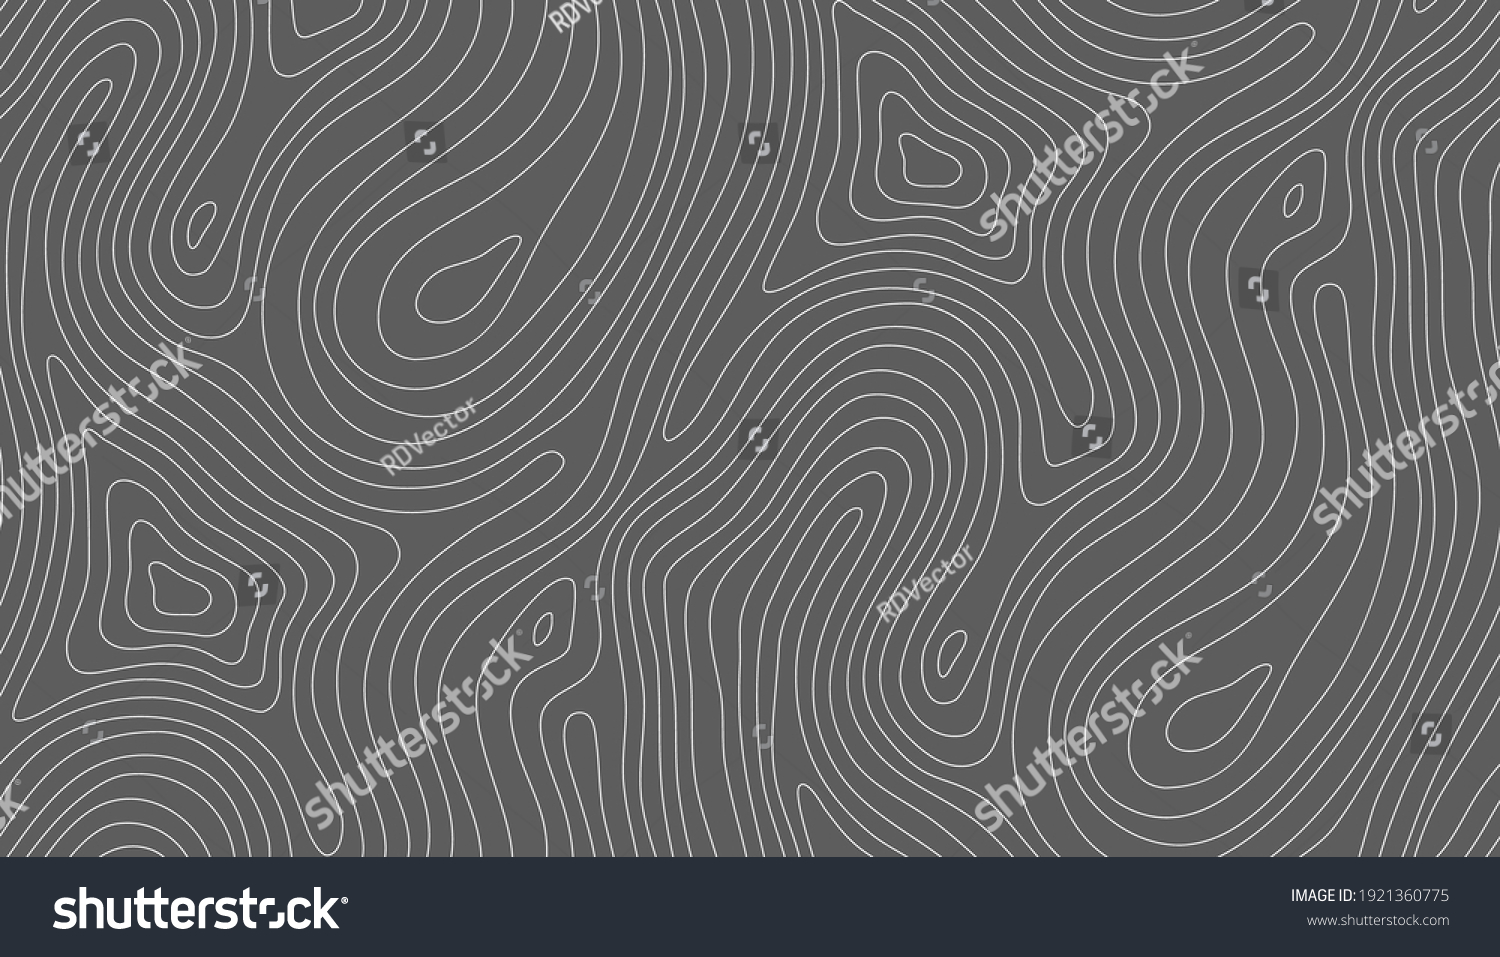 SVG of Seamless vector topographic map background white on dark. Line topography map seamless pattern. Mountain hiking trail over terrain. Contour background geographic grid. svg